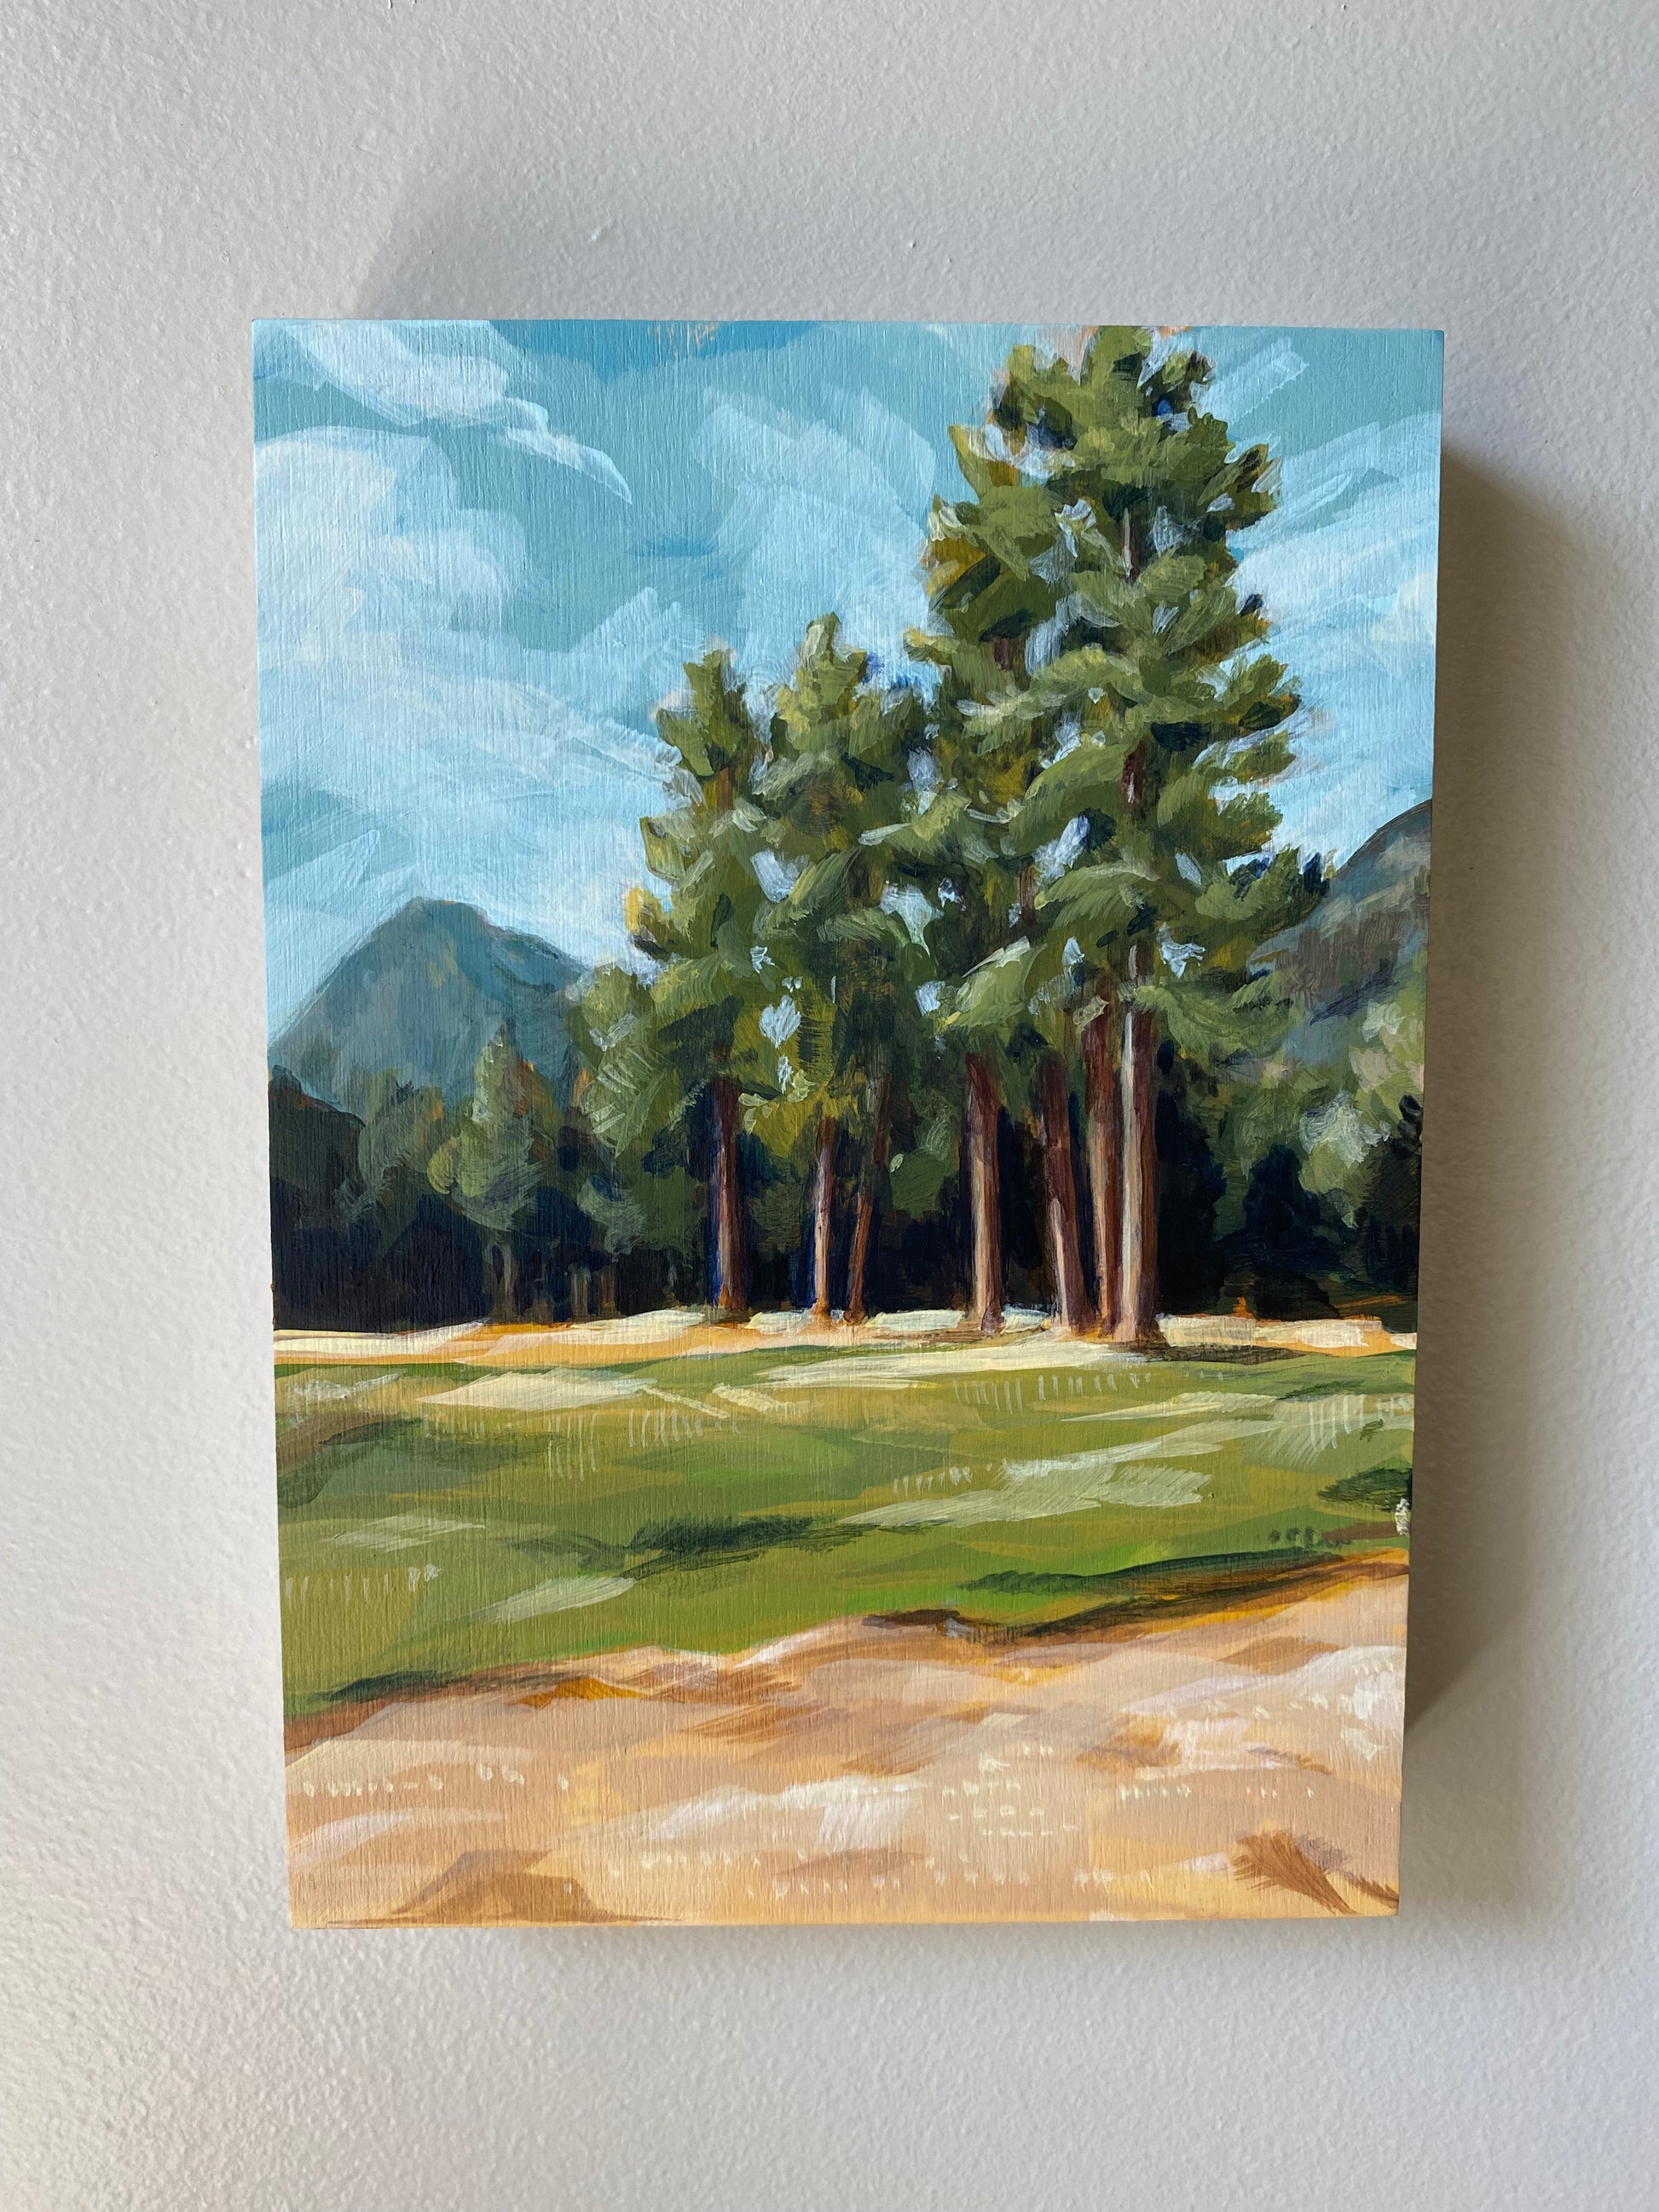 5x7 original acrylic art painting of joseph mountains. The nature landscape scene features tall trees and a mountain scape.